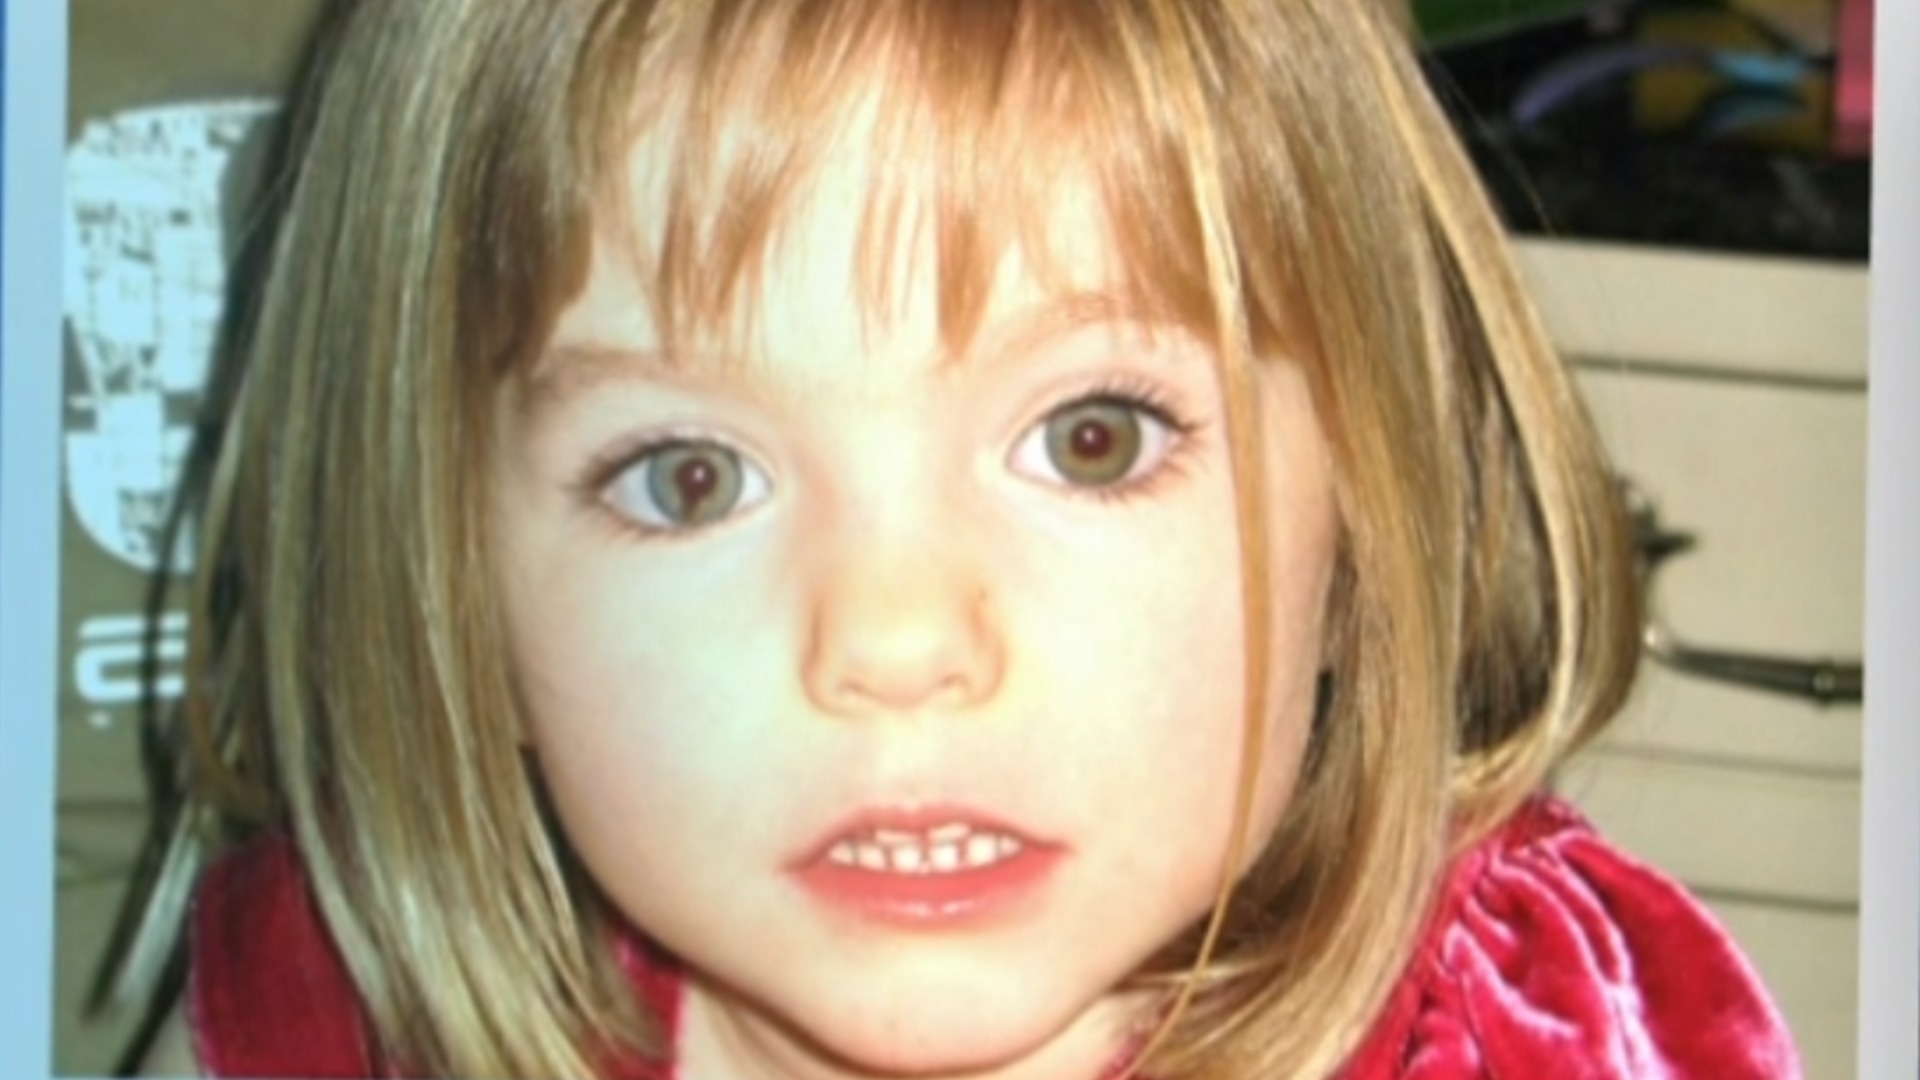 13 years after Madeleine McCann went missing, investigators believe they have a credible suspect